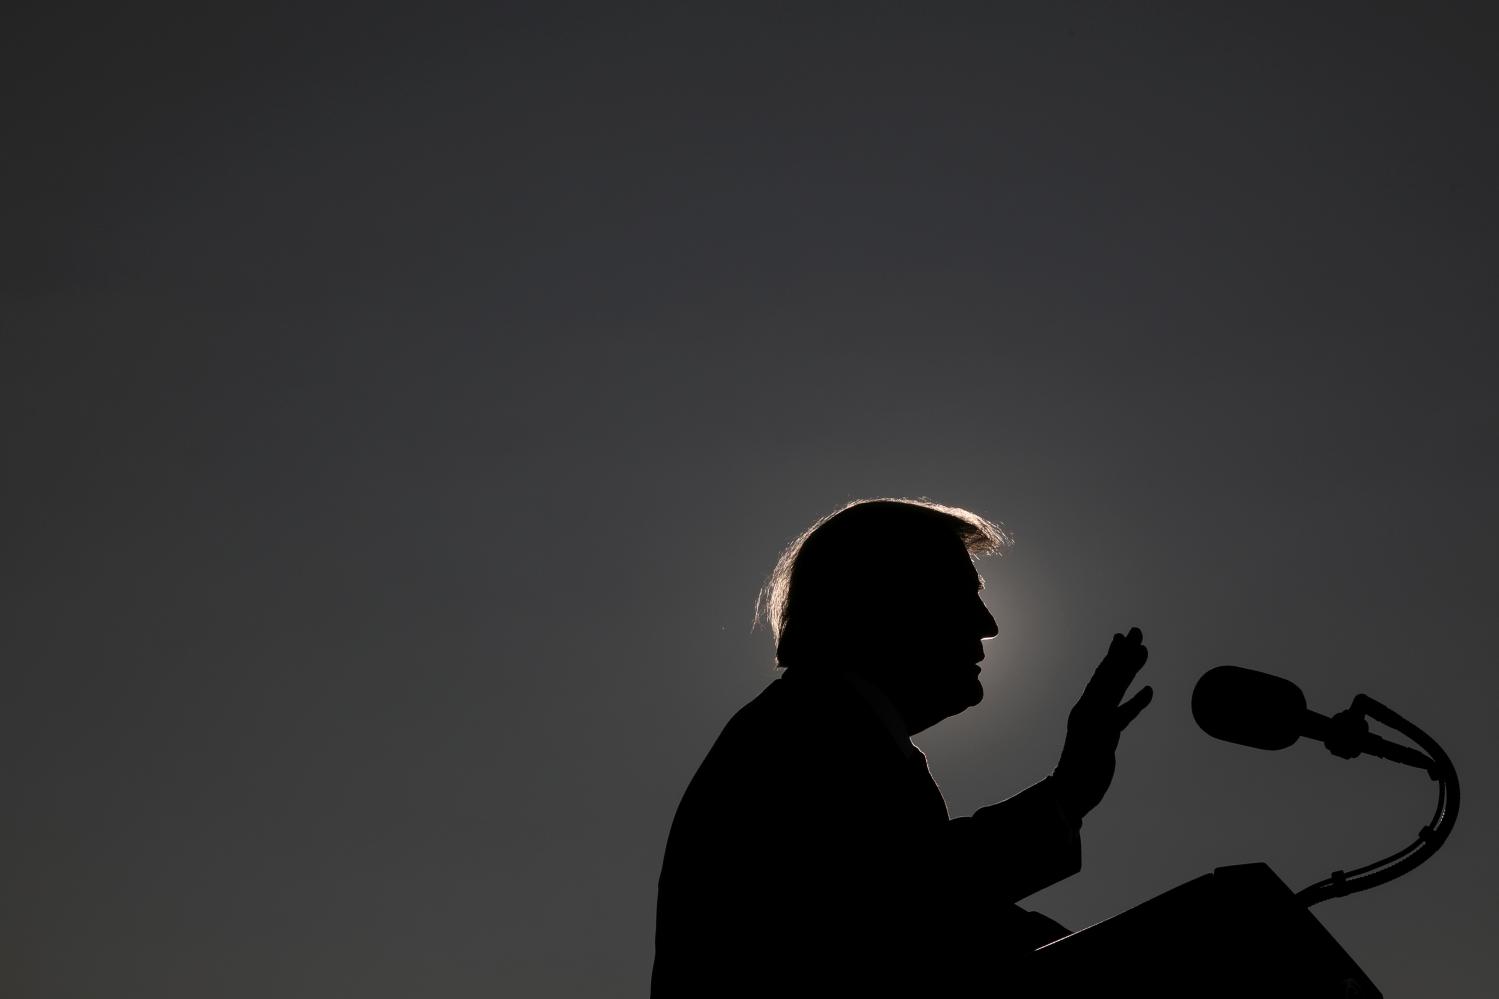 U.S. President Donald Trump is silhouetted as he delivers a speech while campaigning at Dayton International Airport in Dayton, Ohio, U.S., September 21, 2020. REUTERS/Tom Brenner